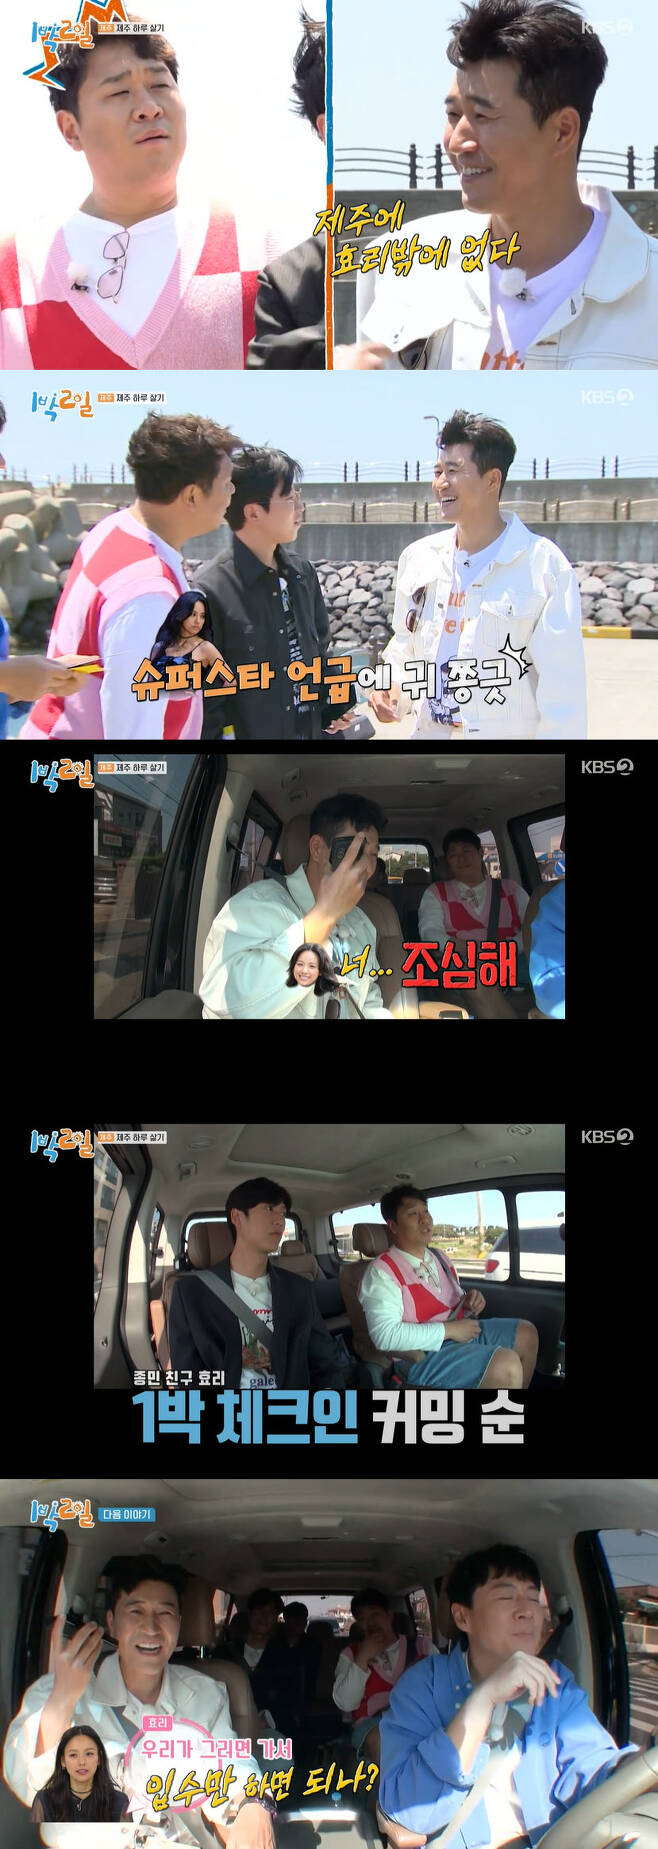 KBS2 Season 4 for 1 Night 2 Days (hereinafter referred to as 1 night and 2 days) and The Way to the Airport featured on the 5th, with 10.4% of TV viewer ratings (Nielson Korea provided, based on All States).In particular, the moment Kim Jong-min, who made the phone call at the end of the broadcast mention Superstar Lee Hyori as Jeju Island Friend, soared to 14.2% of the highest TV viewer ratings per minute (Nilson Korea provided, based on All States furniture).2049 TV viewer ratings ranked first in entertainment that was broadcast in the same time zone with 3.4% (Nilson Korea provided, based on furniture in the metropolitan area).On this day, the members of the Jeju Island to leave for the past were held.From dawn, members gathered at Gimpo Airport wearing colorful airport fashion heard the news like Cheongcheon Wall that they should leave for Jeju Island from different airports.From Gimpo to Girl, the Departure place was revealed, and the members were frustrated that the fate was decided by the straight ride of the VJs in charge.Nine, who became The Departure right to his destination, expressed his childish excitement to Jeju Island, which went in 10 years.The first time he arrived at Jeju Airport, he quickly discovered a hint note by invoking a unique reasoning power.He saw the number on the note and predicted that it would be a Toyota license plate and headed straight to the parking lot, but when the door of all the cars he found was not opened, he fell into a menbong and was saddened.Yeon Jung-hoon, who took the bus to Cheongju Broadcasting, enjoyed the romance with ease and had an unexpected fun with the citizens and a sudden fan meeting.Yeon Jung-hoon, who discovered a score with hints on the piano located in the middle of Cheongju Broadcasting Airport, used Han Ga-in Chance to ask for the title of the agitation and obtained a clue called lighthousekeeper.Kim Jong-min boarded Deagu Dindin and KTX, and won a white horse photo at Pohang Airport, winning a scabbard match reminiscent of a squid game.Deagu arrived at the Deagu and found a lock-up bag in the historical storage, and boasted of the steamed road that only unlocked the password with commitment, embarrassing all the staff.There, Dindin, who had a public money of 150,000 won, showed boldness to steal 20,000 won, and after arriving at Jeju Island, he persuaded his youngest Nine to buy ice cream, coffee and cake, which caused a laugh.Finally, Mun Se-yun arrived at Jeju Airport with the key of Toyota, and the members succeeded in heading to the gathering place Baekma Lighthouse by combining the hints collected by each.Members received 10 missions to live a day in Jeju Island.Among them, making a true friend in Jeju Island and making memories of getting together caused the members to sigh.Mun Se-yun grumbled: There is no Friend in Jeju, I am.But Kim Jong-min surprised everyone by mentioning Superstar acquaintances, saying, There is only Jeju Island Hyori.The members urged call me quickly, and Kim Jong-min was embarrassed, saying, I may not want to see you again.The members demanded a call without bowing and Kim Jong-min eventually burst into anger, Dont!In a later trailer, Lee Hyori laughed at Kim Jong-mins phone conversation, saying, Yaya! You are careful.Lee Hyori, along with the caption Lee Hyori 1 night check-in Cumming Soon, told Kim Jong-min, If we do, do we just have to go get it?I can not have time for anything else. The scene raised the expectation for next weeks broadcast.